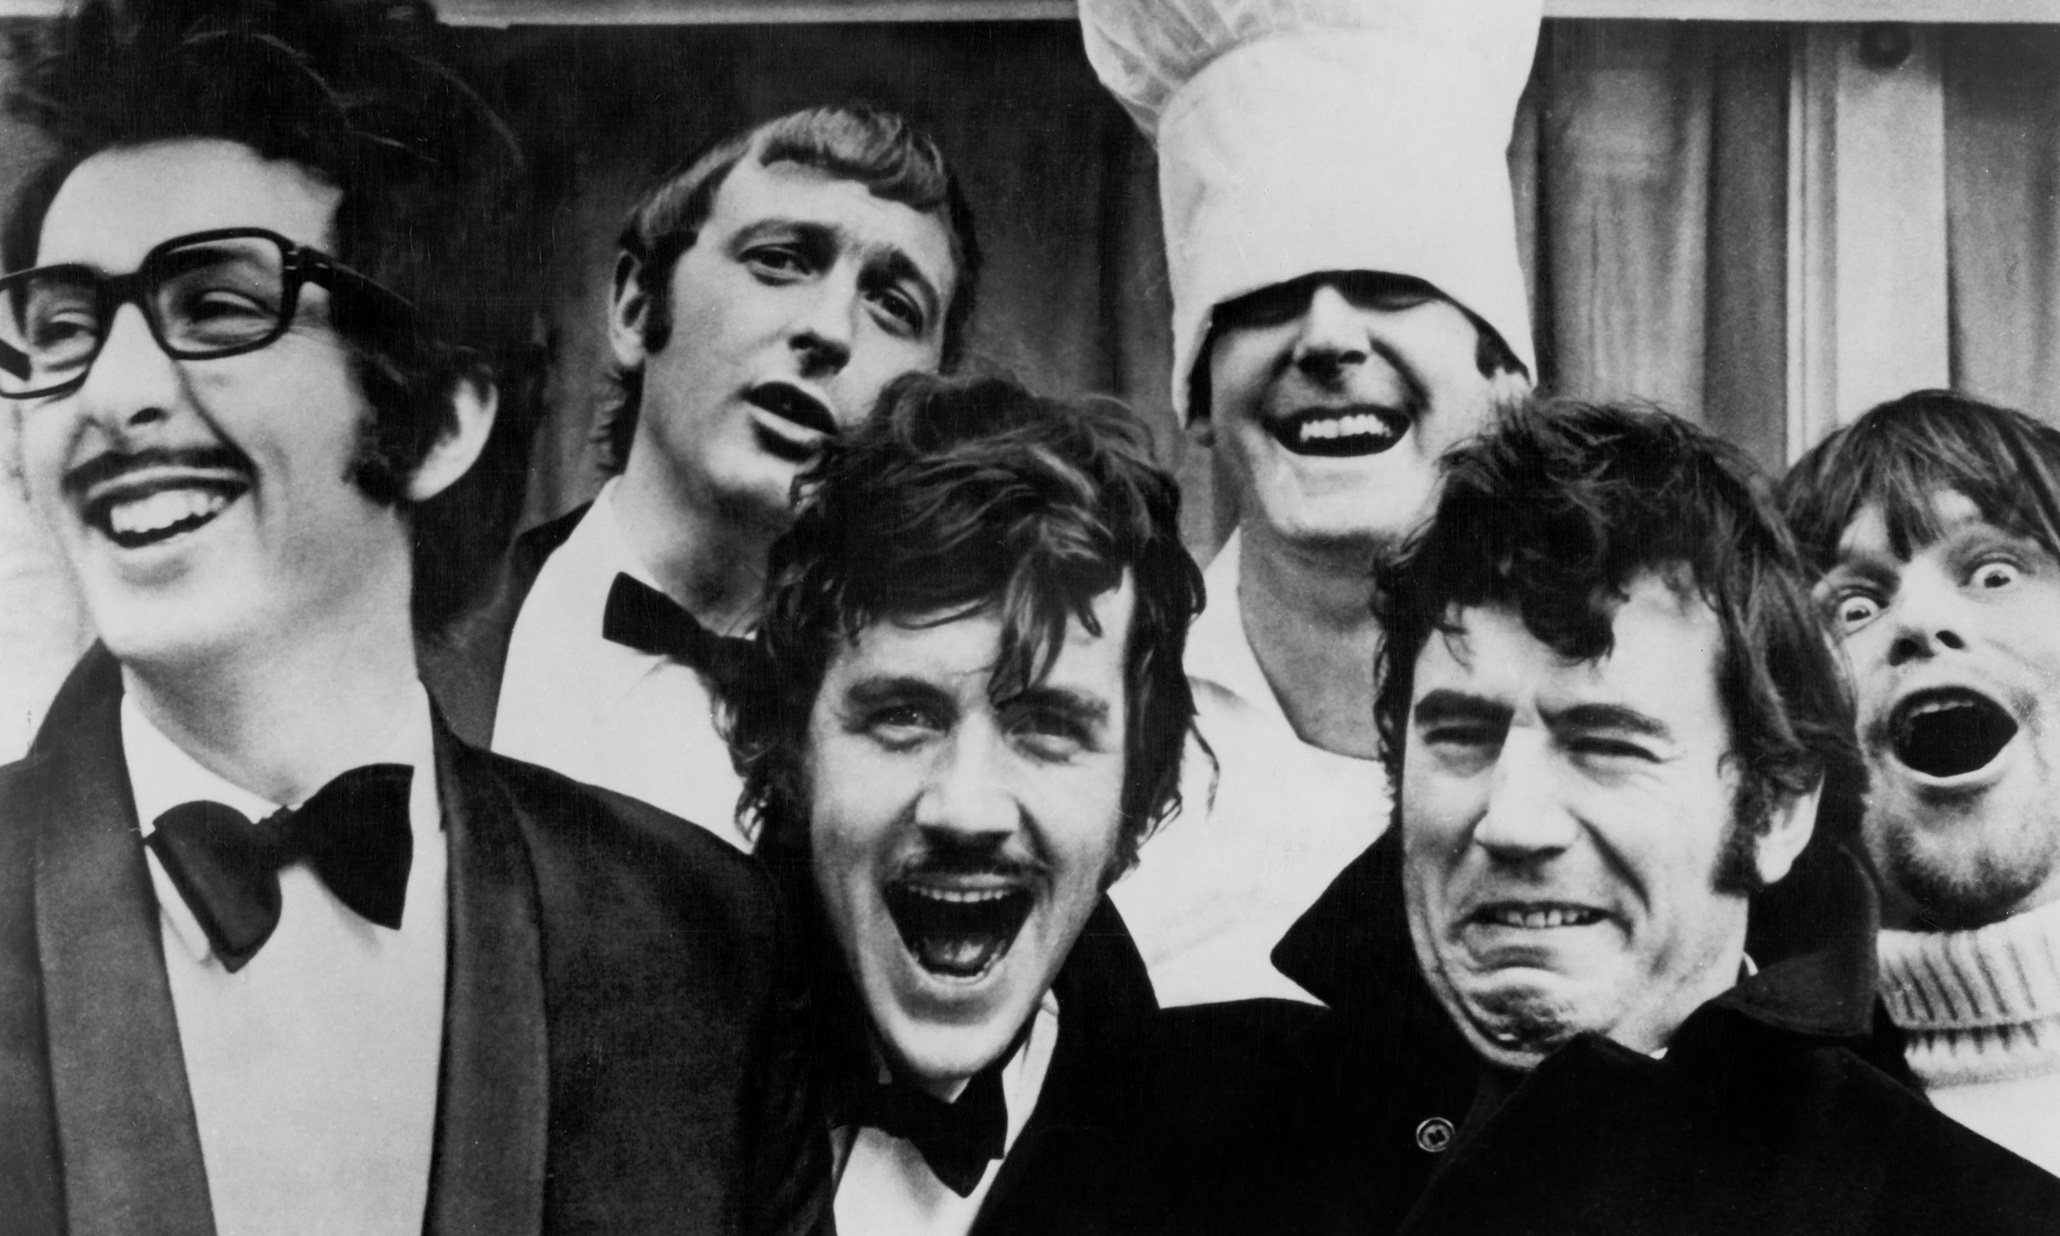 Monty Python films: rank them from best to worst | Film | The Guardian2060 x 1236